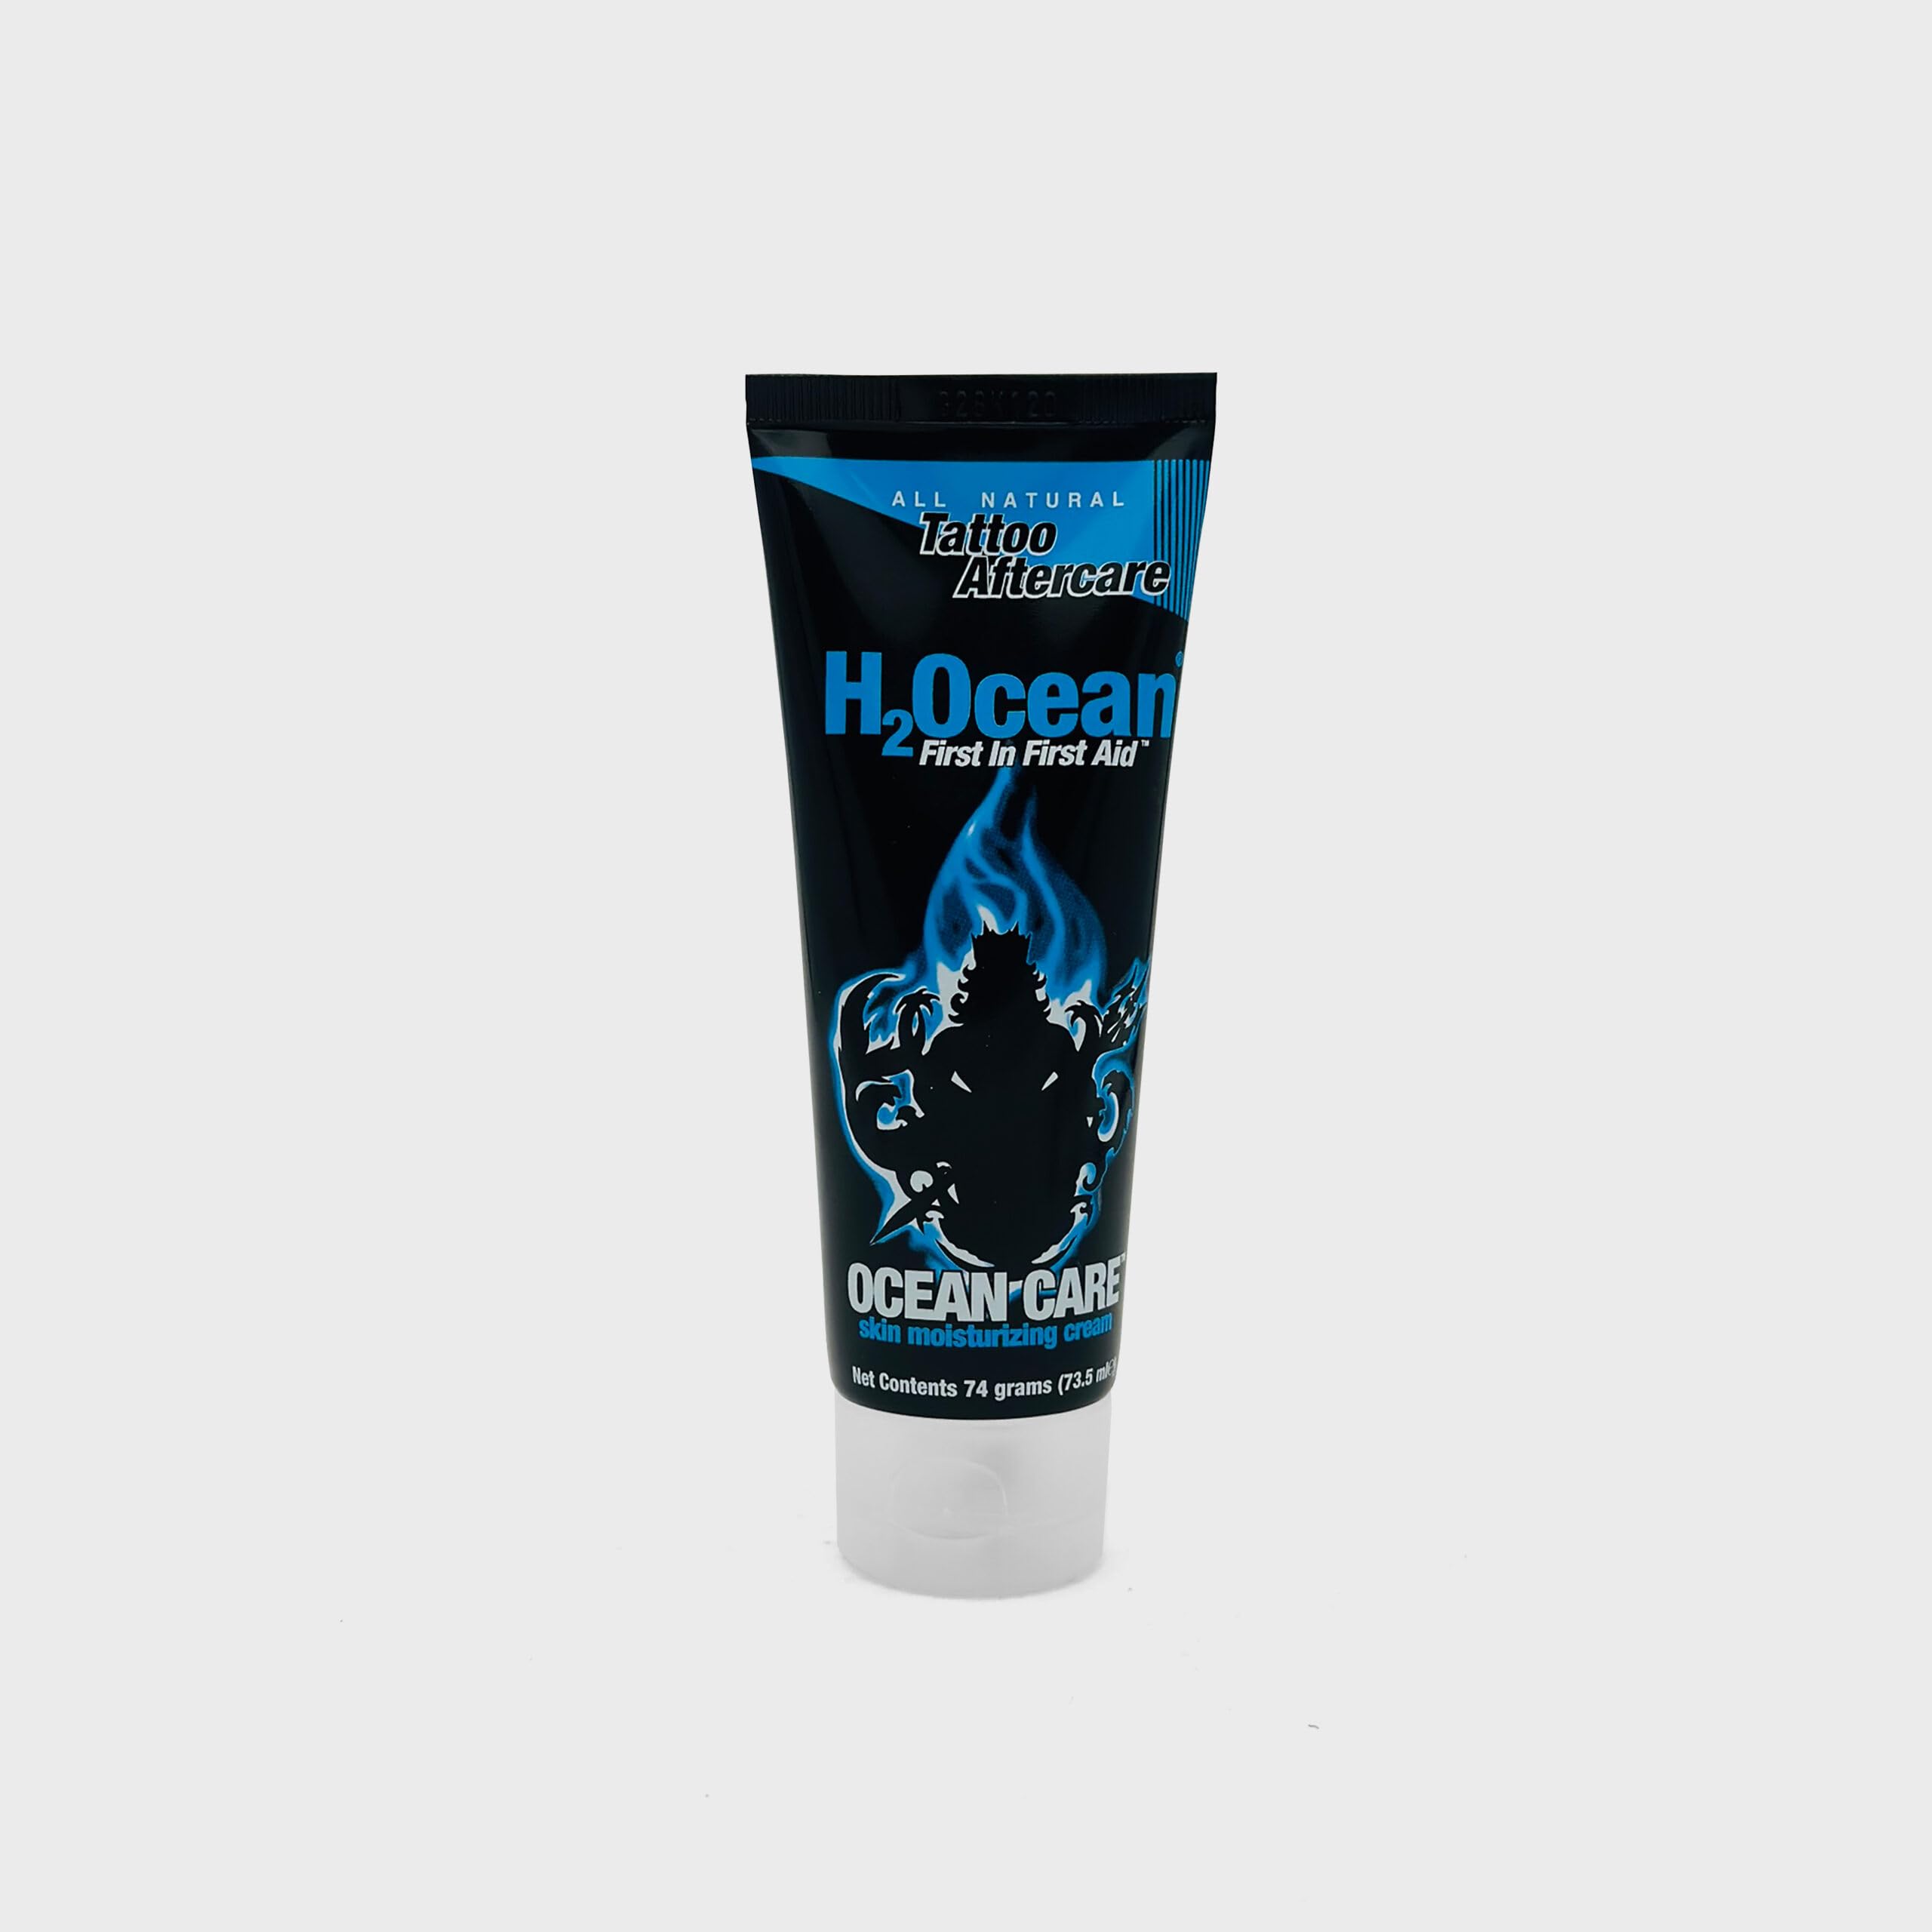 H2Ocean Extreme Tattoo Care Complete Tattoo Aftercare Kit For Hard to Heal Tattoos, Including All Natural Moisturizing Blue Green Soap, Healing Aquatat Ointment, & Moisturizing Care Cream